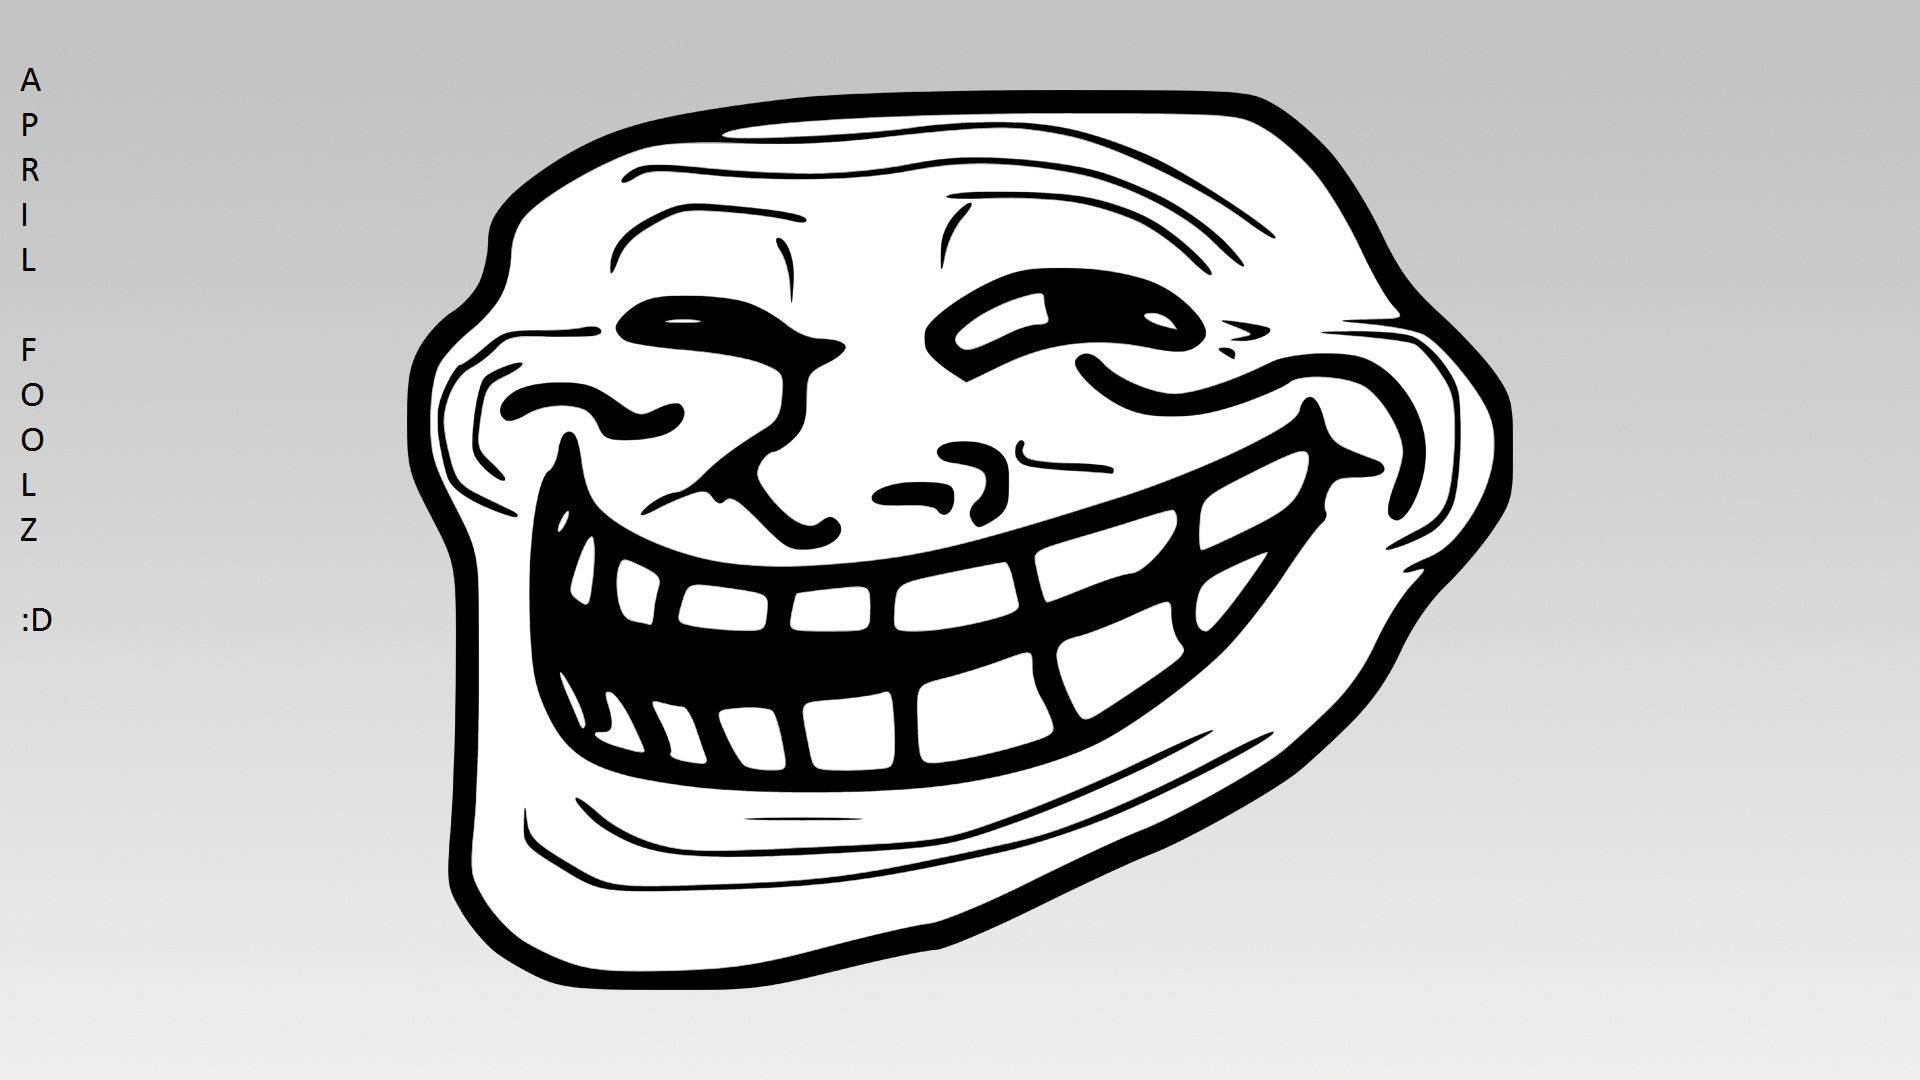 "Troll face ready to take on the internet!" Wallpaper